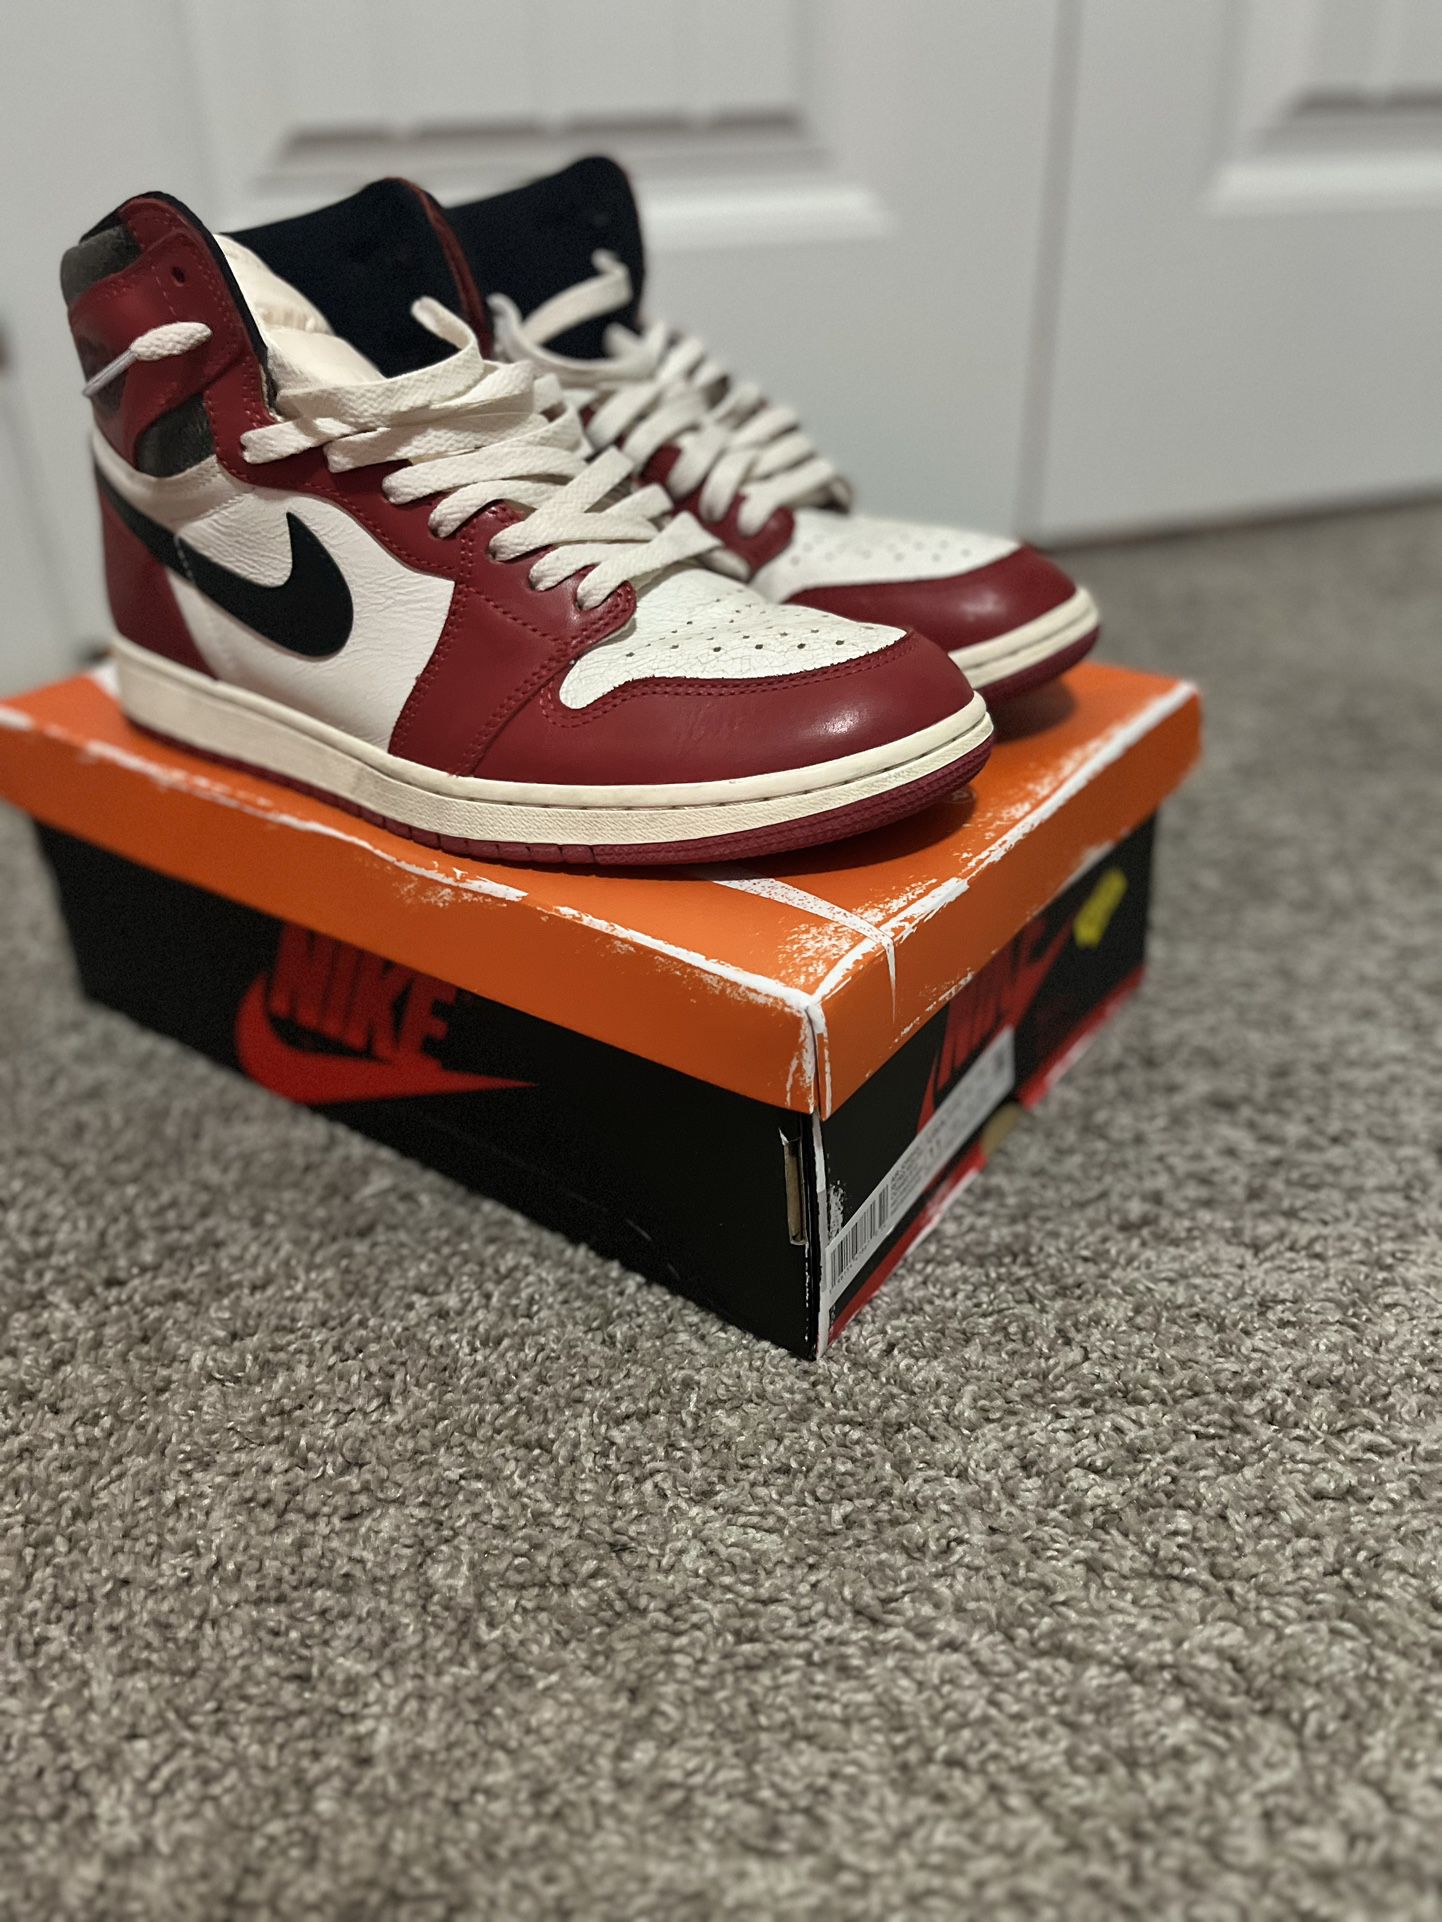 Lost And Founds Jordan 1 Size 11